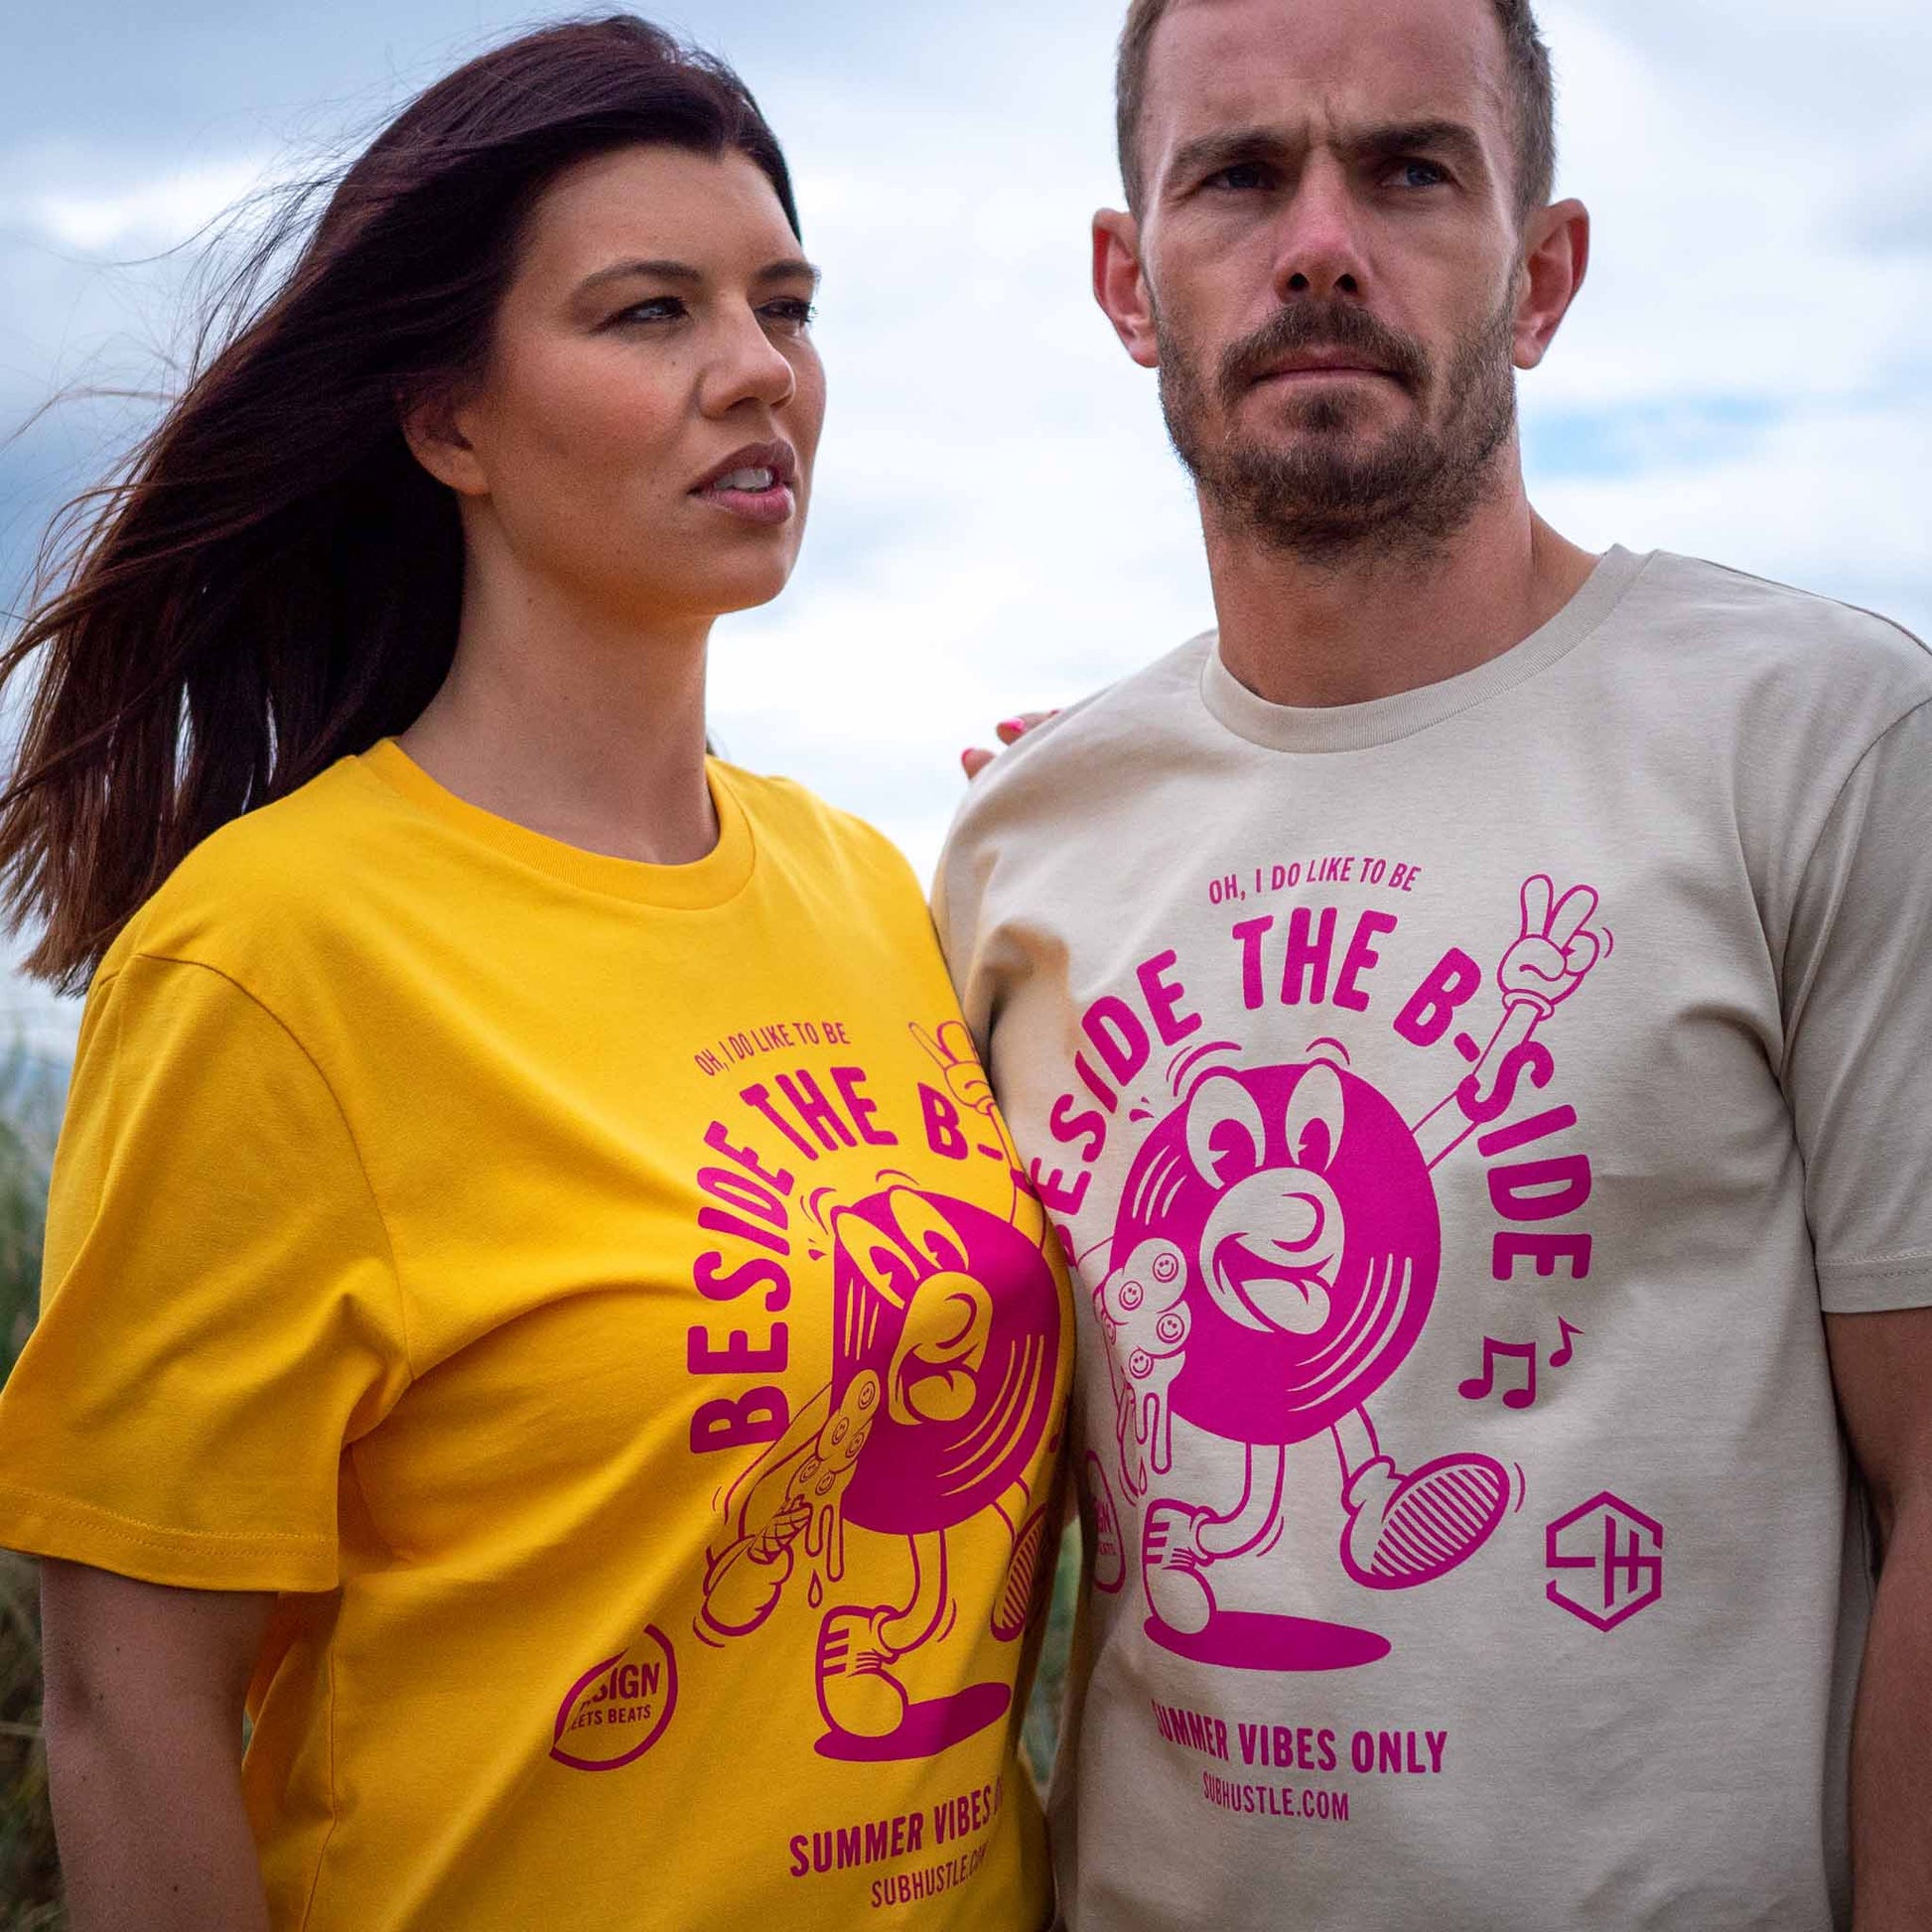 Summer vibes house music unisex t-shirt in yellow and raspberry